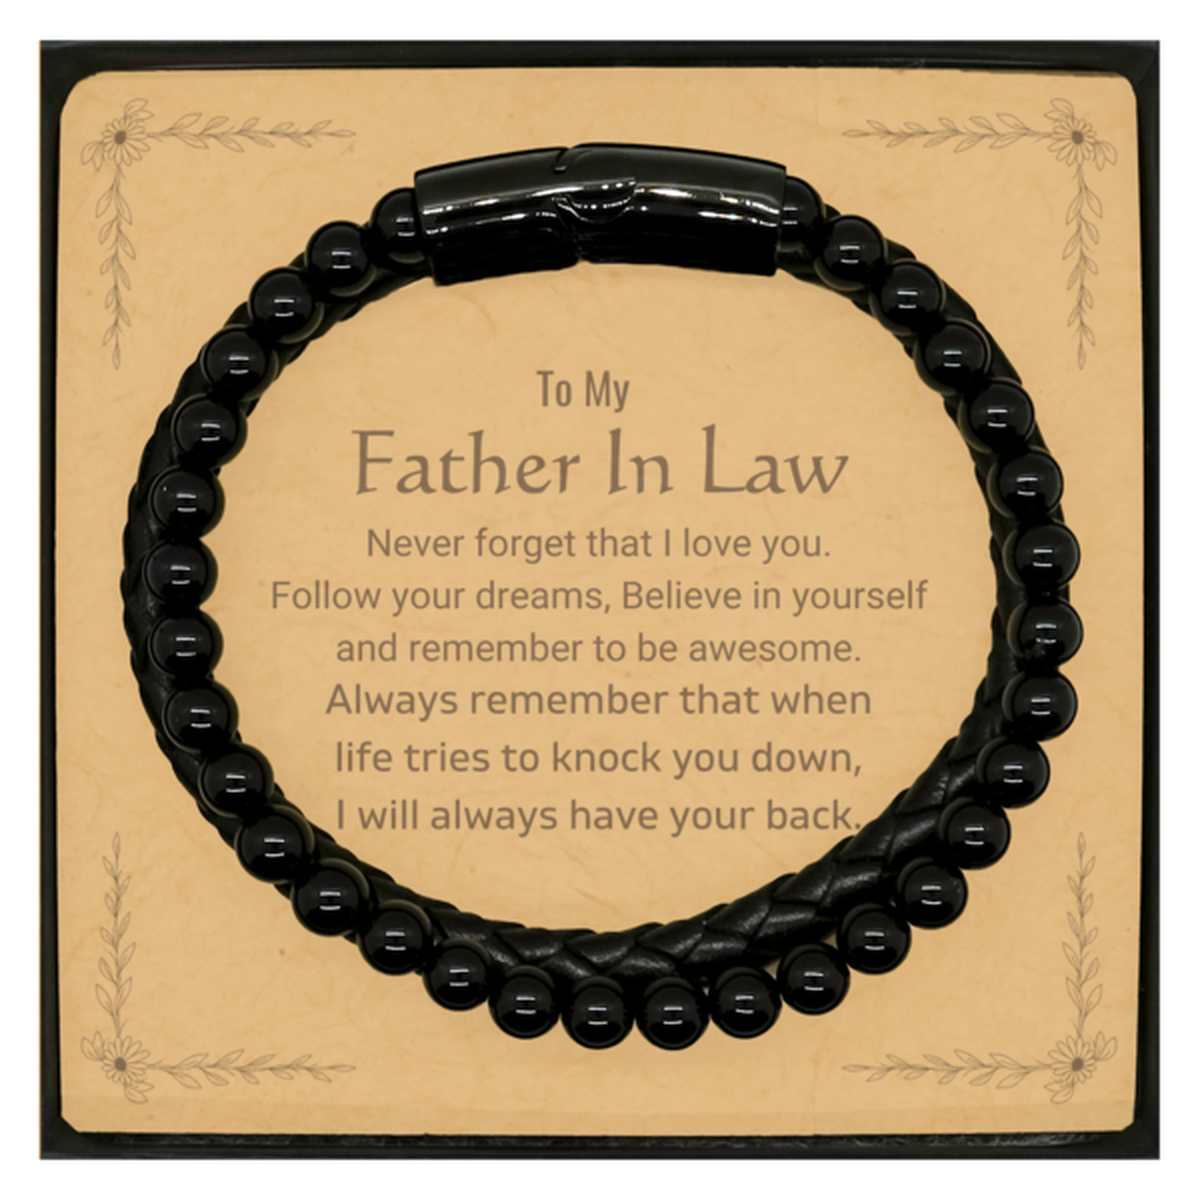 Inspirational Gifts for Father In Law, Follow your dreams, Believe in yourself, Father In Law Stone Leather Bracelets, Birthday Christmas Unique Gifts For Father In Law